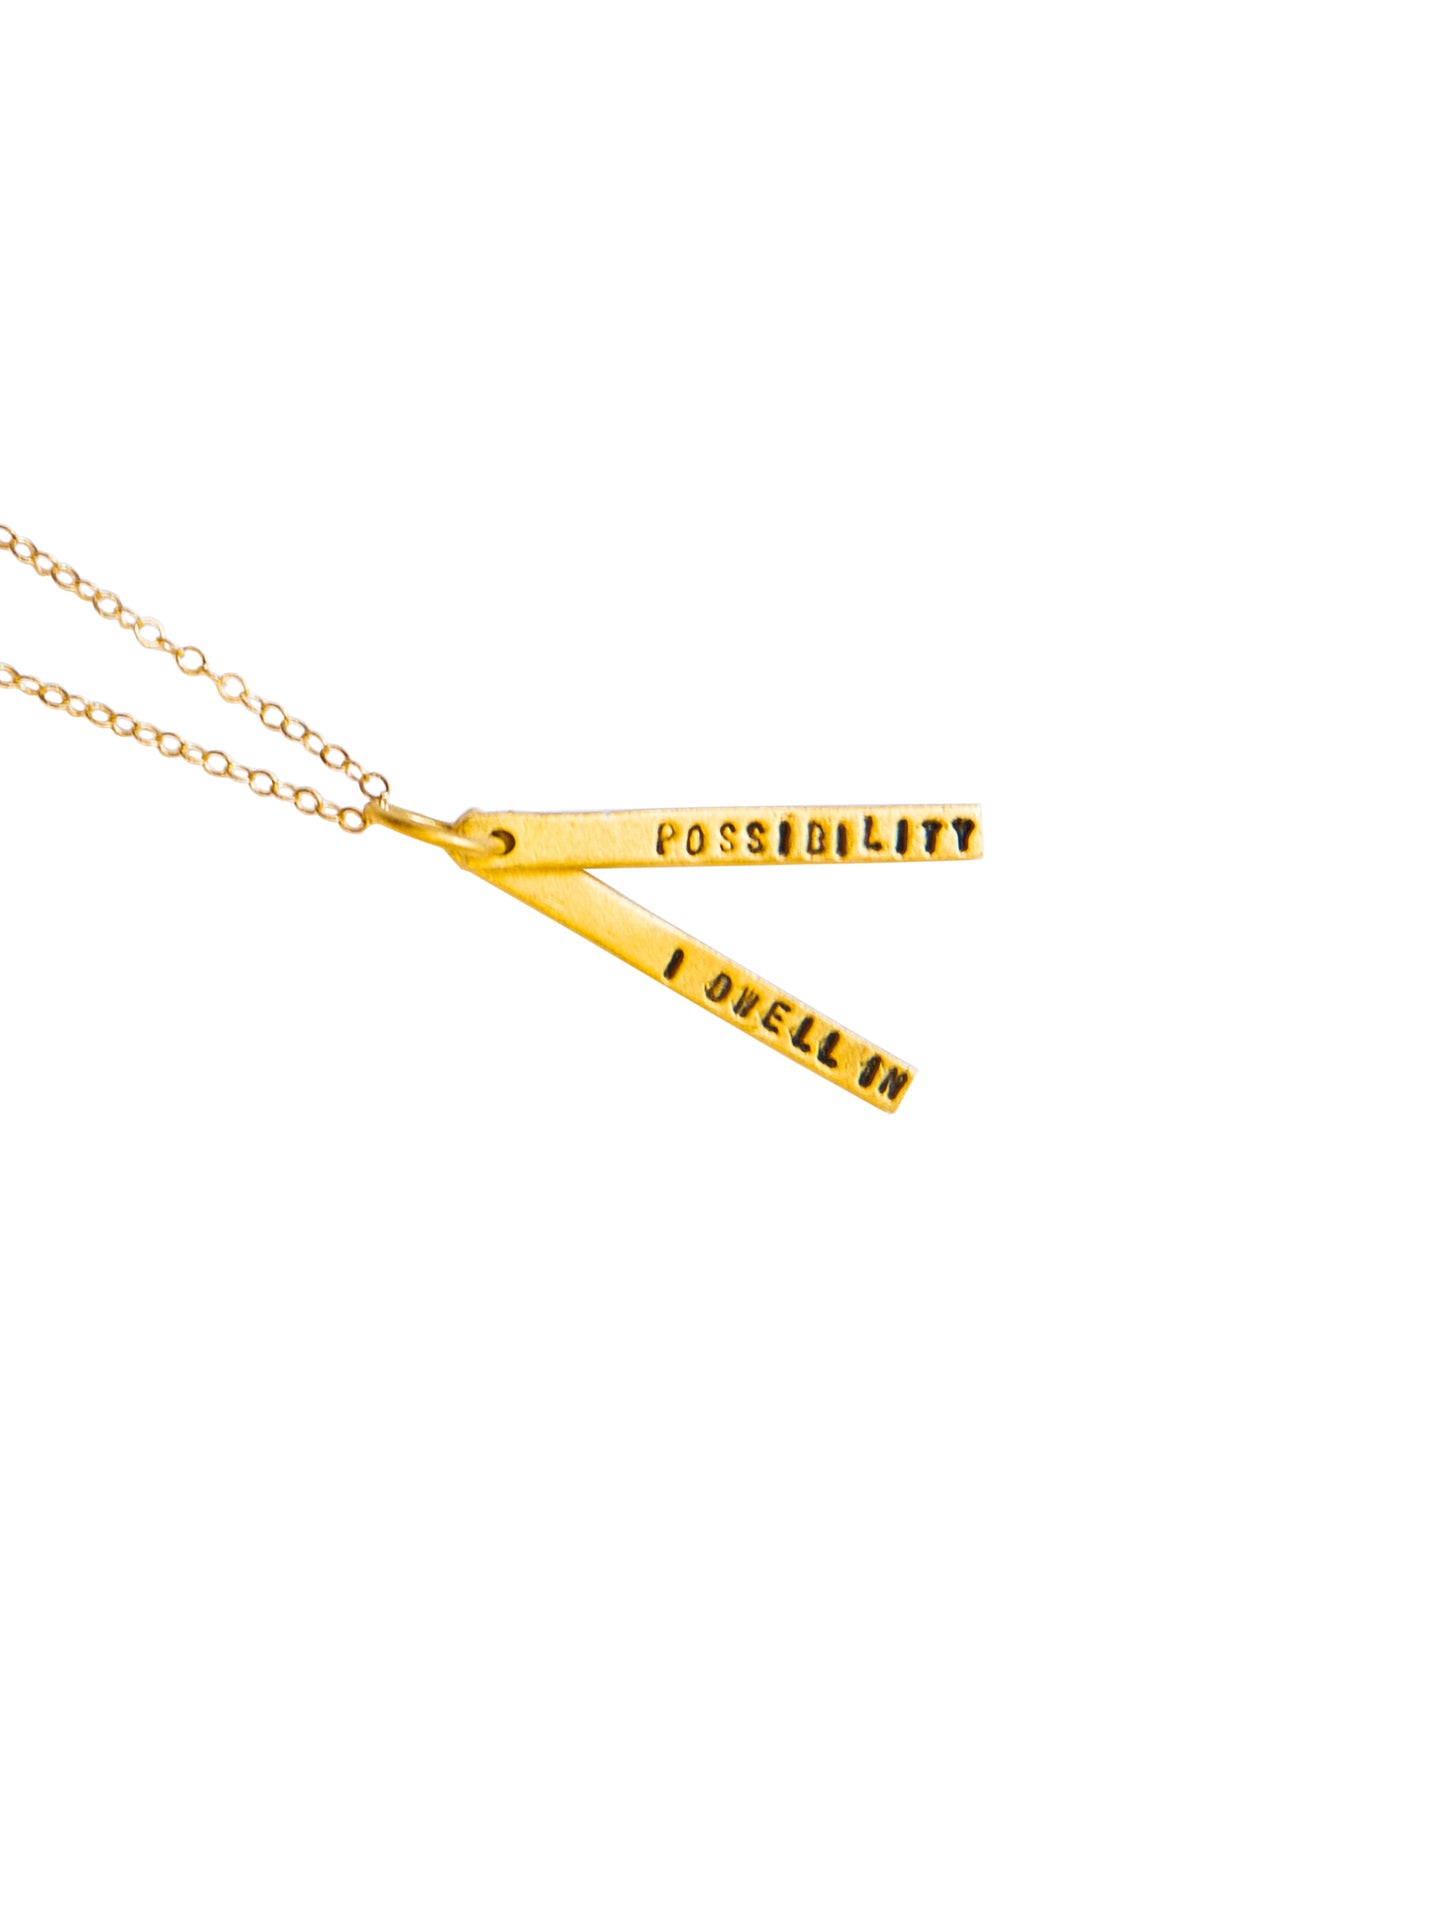 Chocolate & Steel Long-Bar Quote Necklaces Emily Dickinson Possibility Gold Weston Table